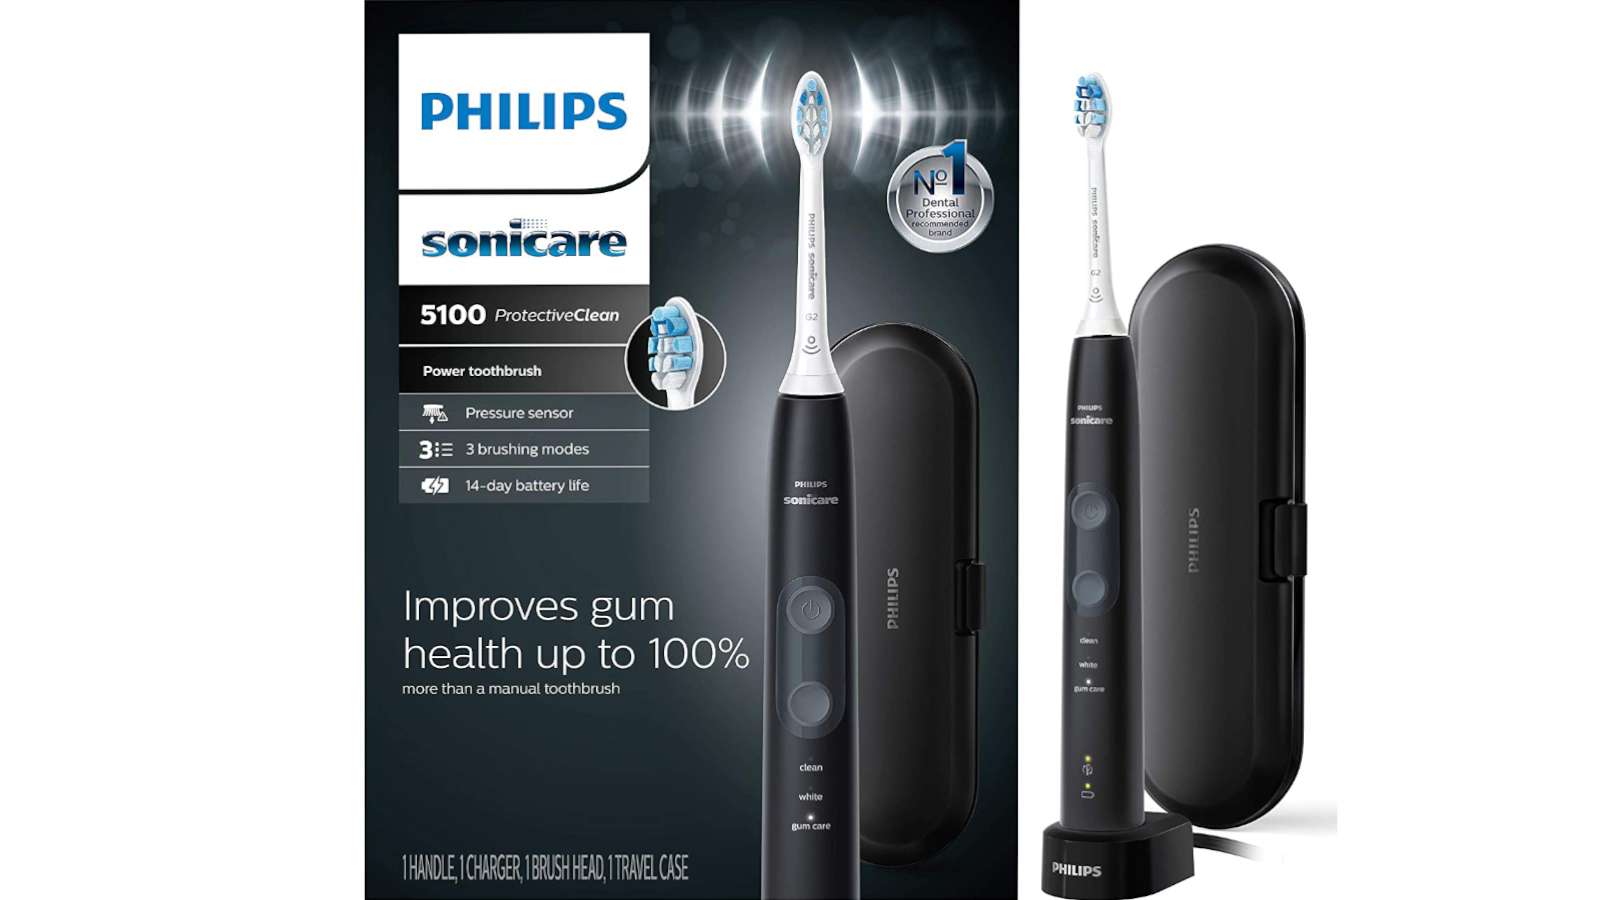 reviews on best philips sonicare toothbrushes - Philips Sonicare ProtectiveClean 5100 (Black, HX6850/60) toothbrush and its packaging